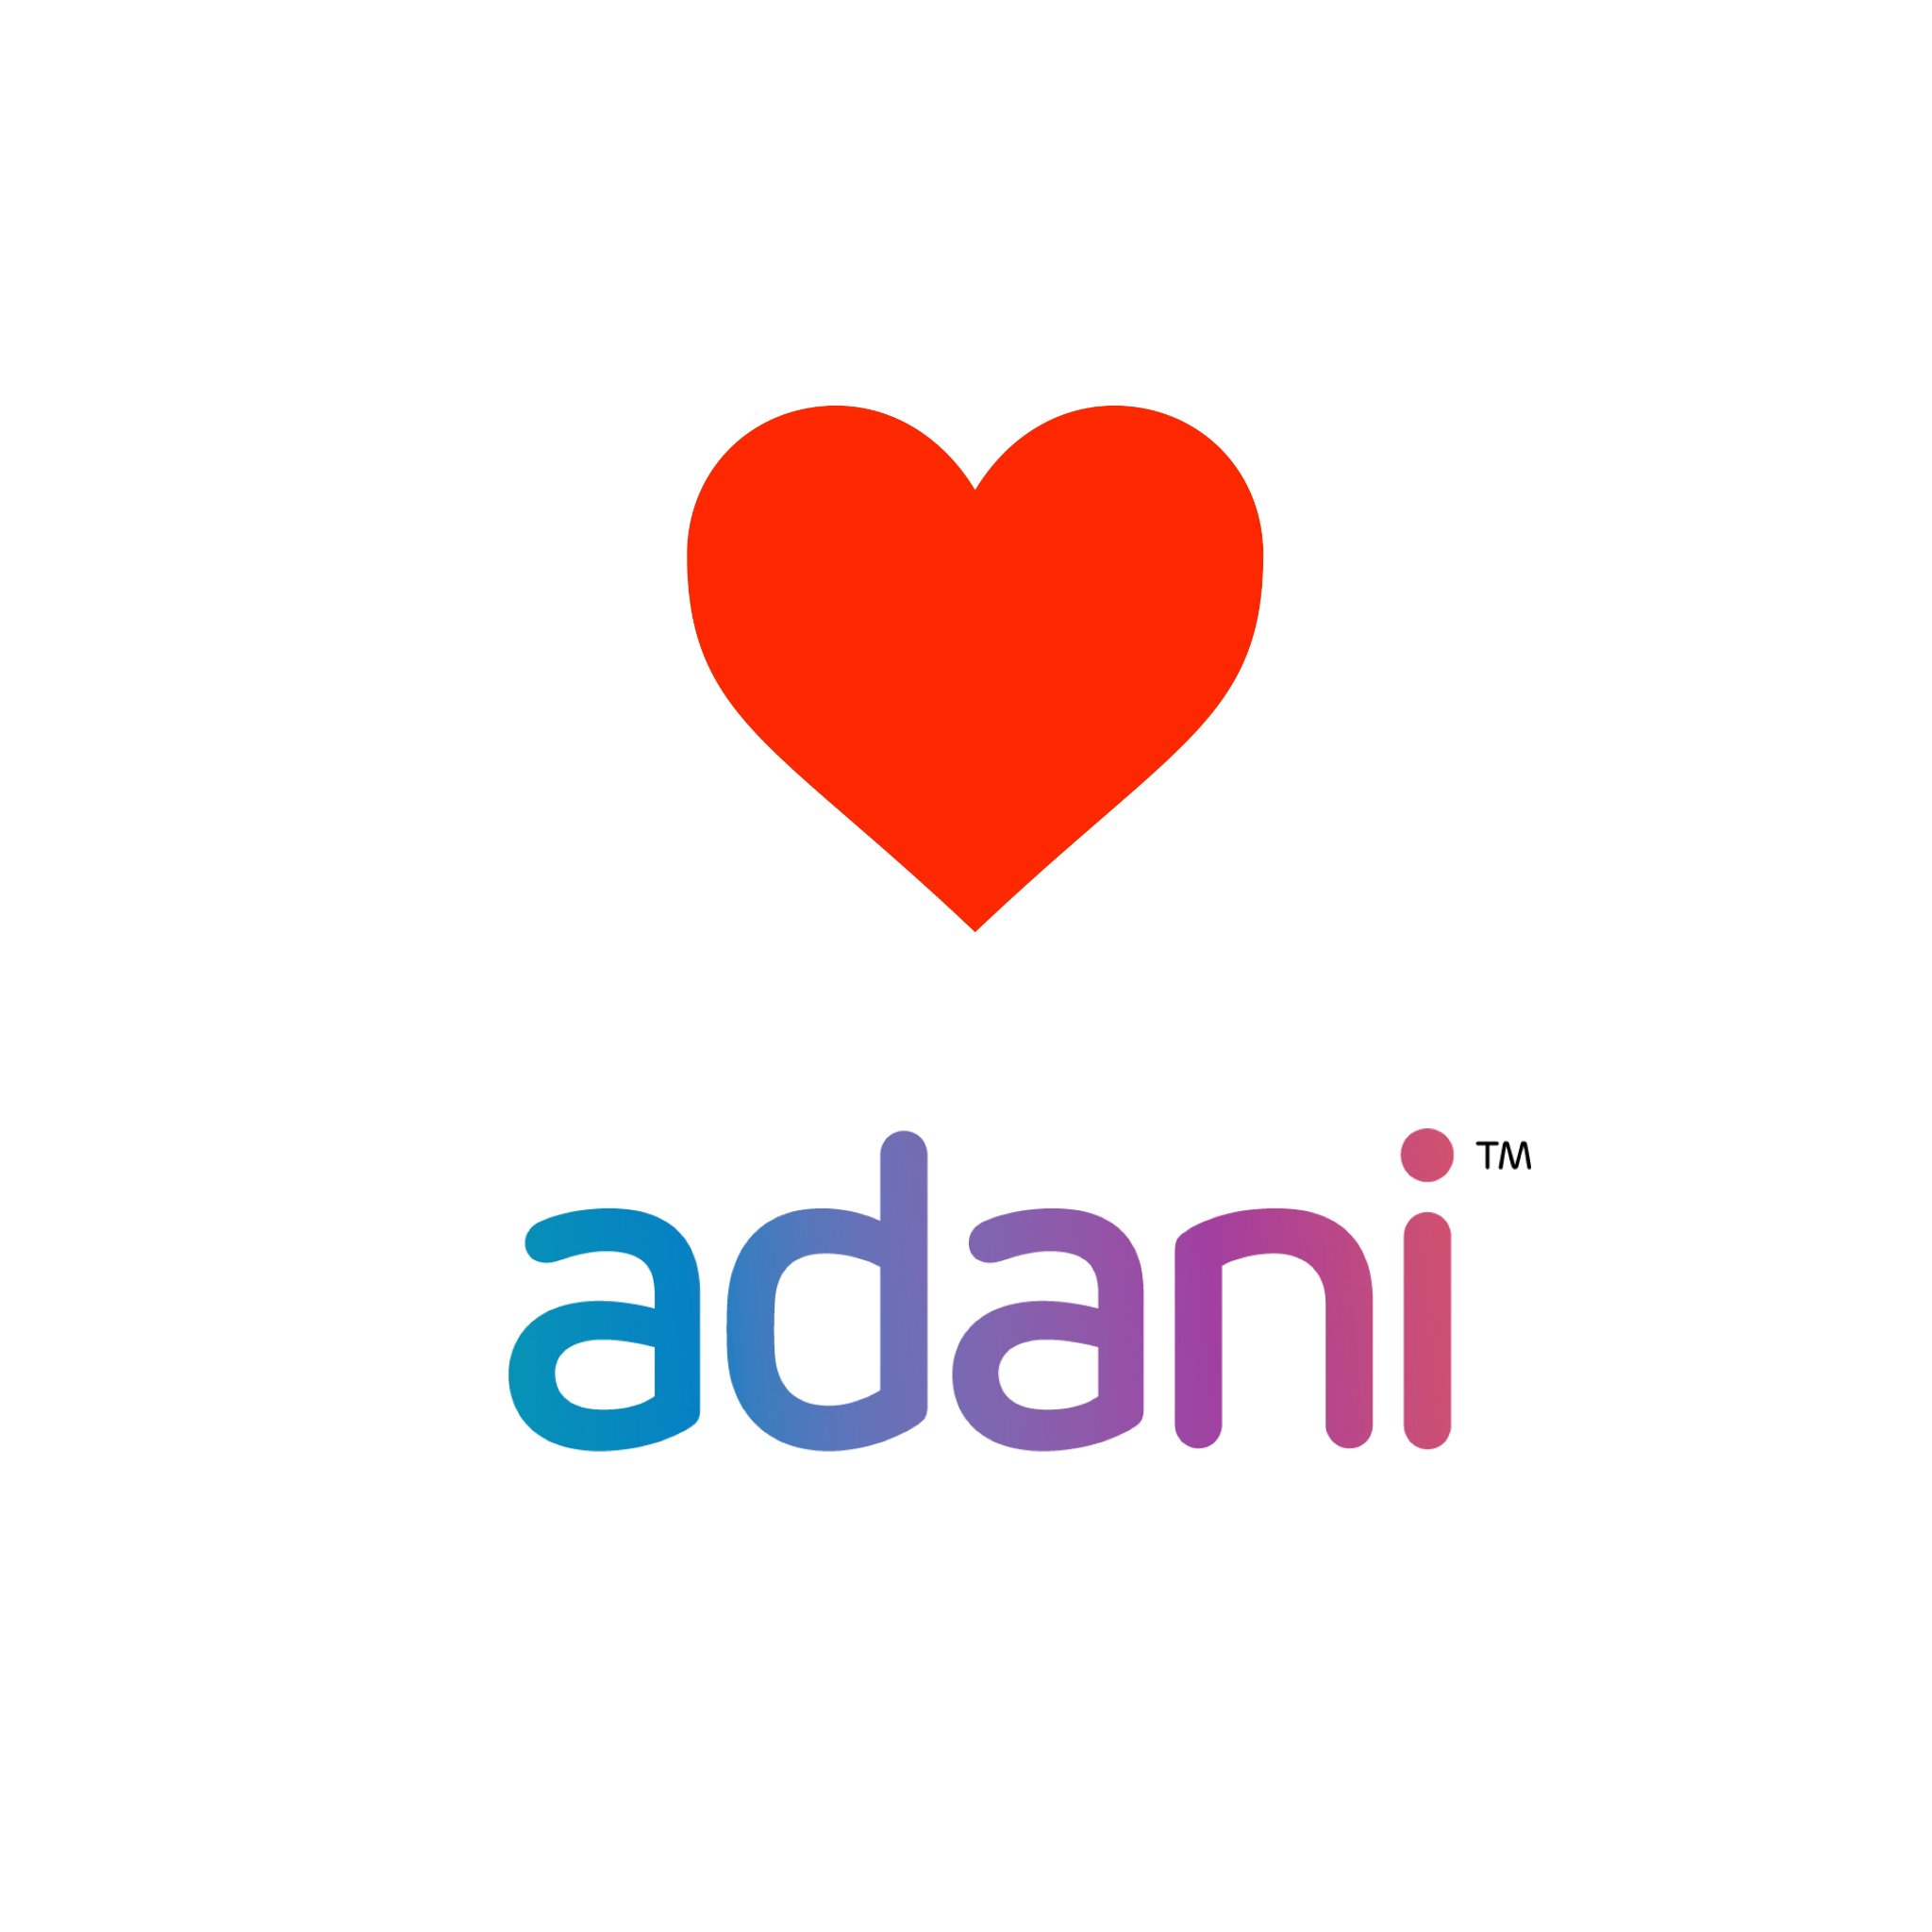 Unofficial campaign in support of the Adani Carmichael coal mine and the jobs, economic growth and prosperity it will bring to regional Queensland.